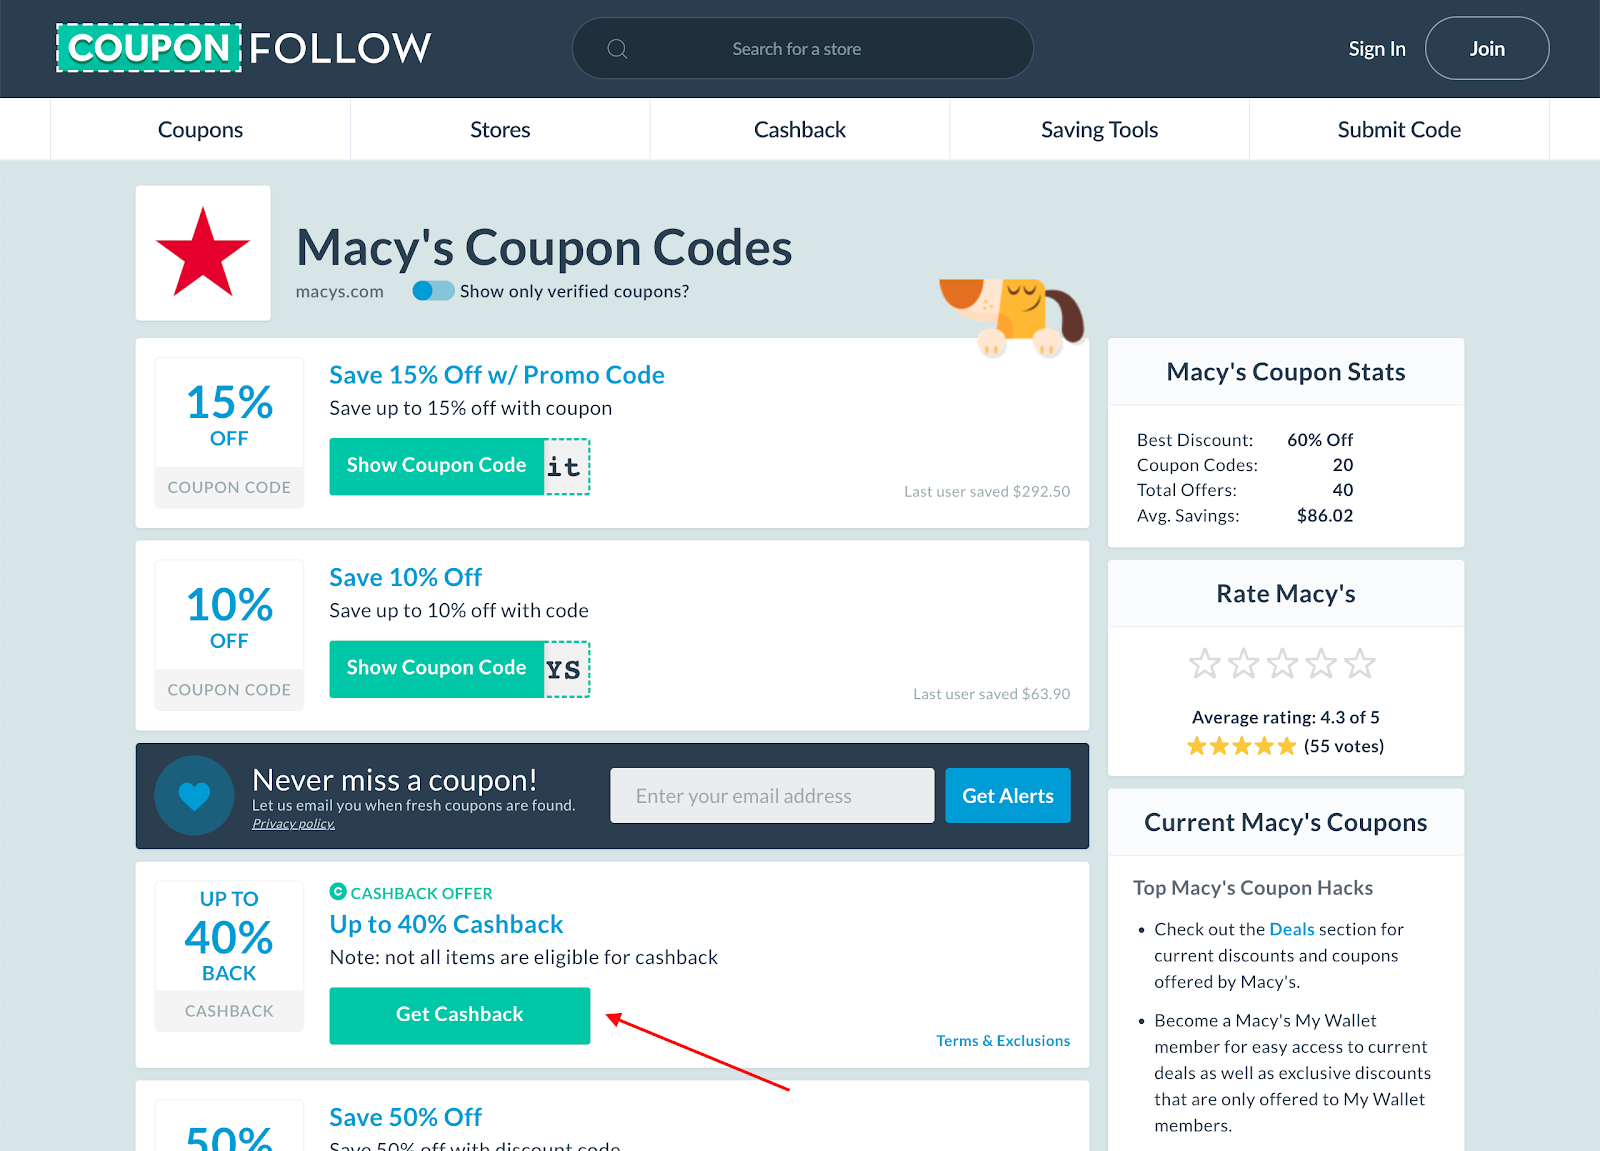 coupon codes for Macy's on CouponFollow